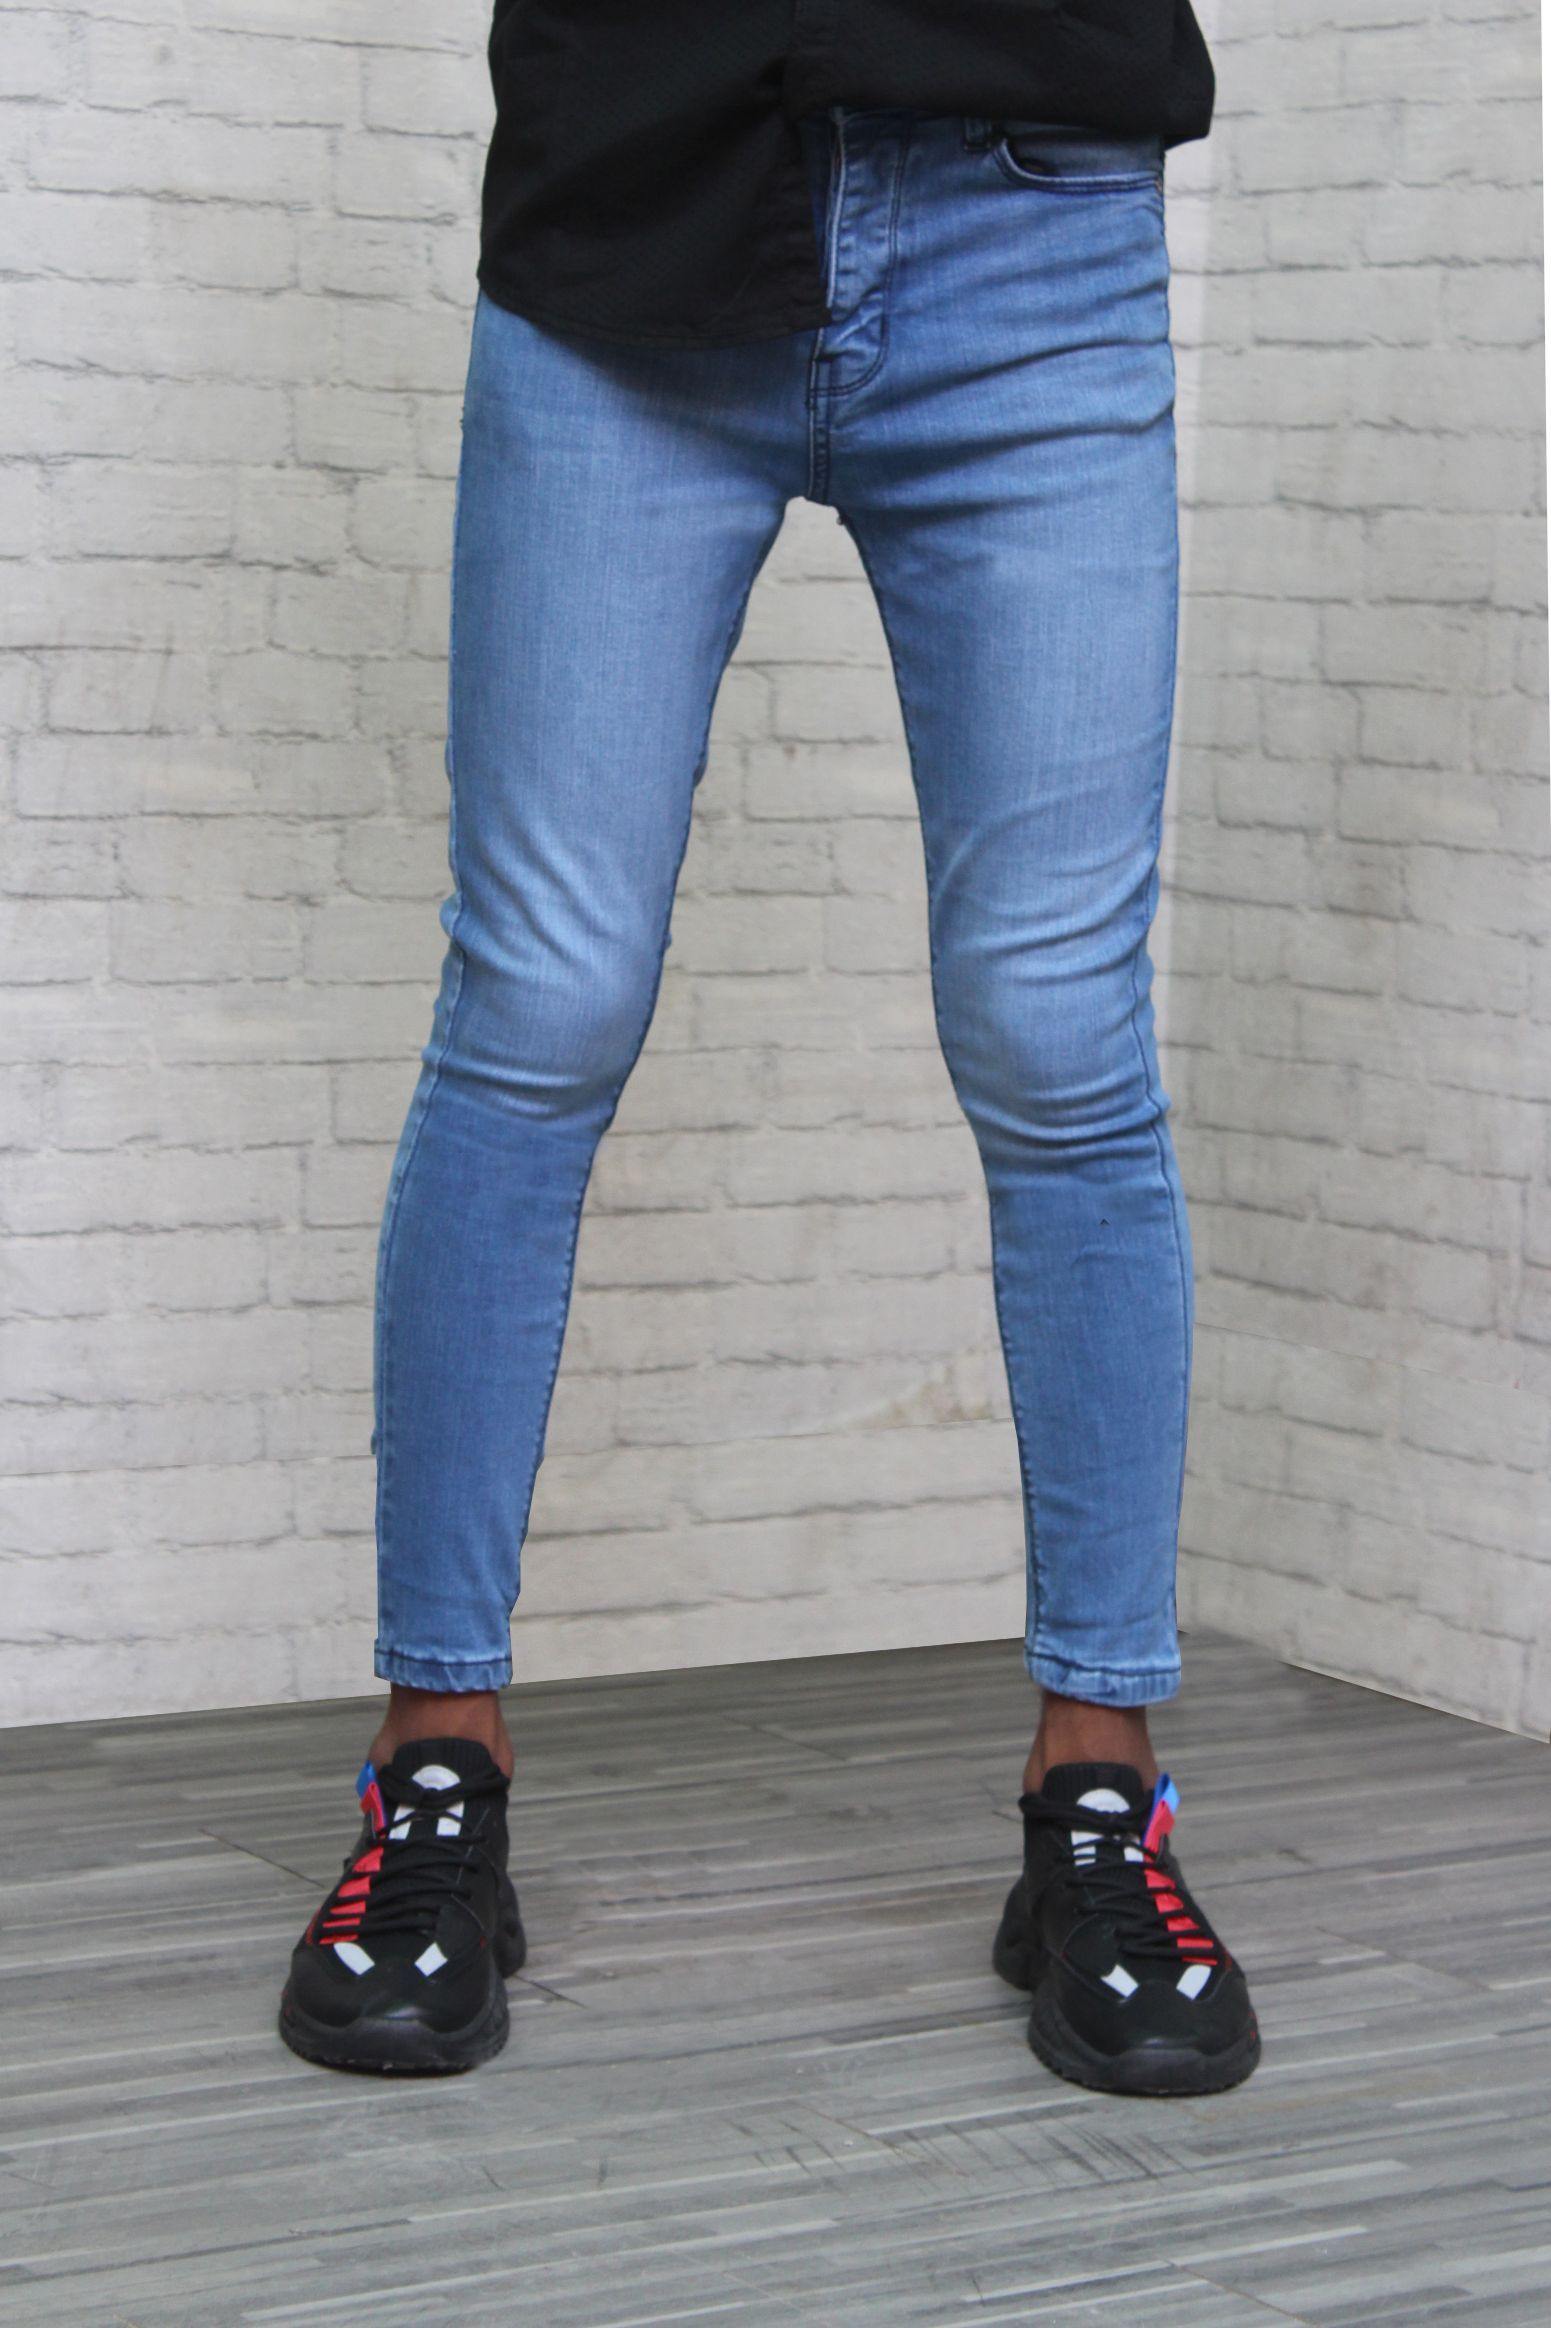 NAVY Blue Ankle Fit Denim Jeans M1-027 - Italiano.pk